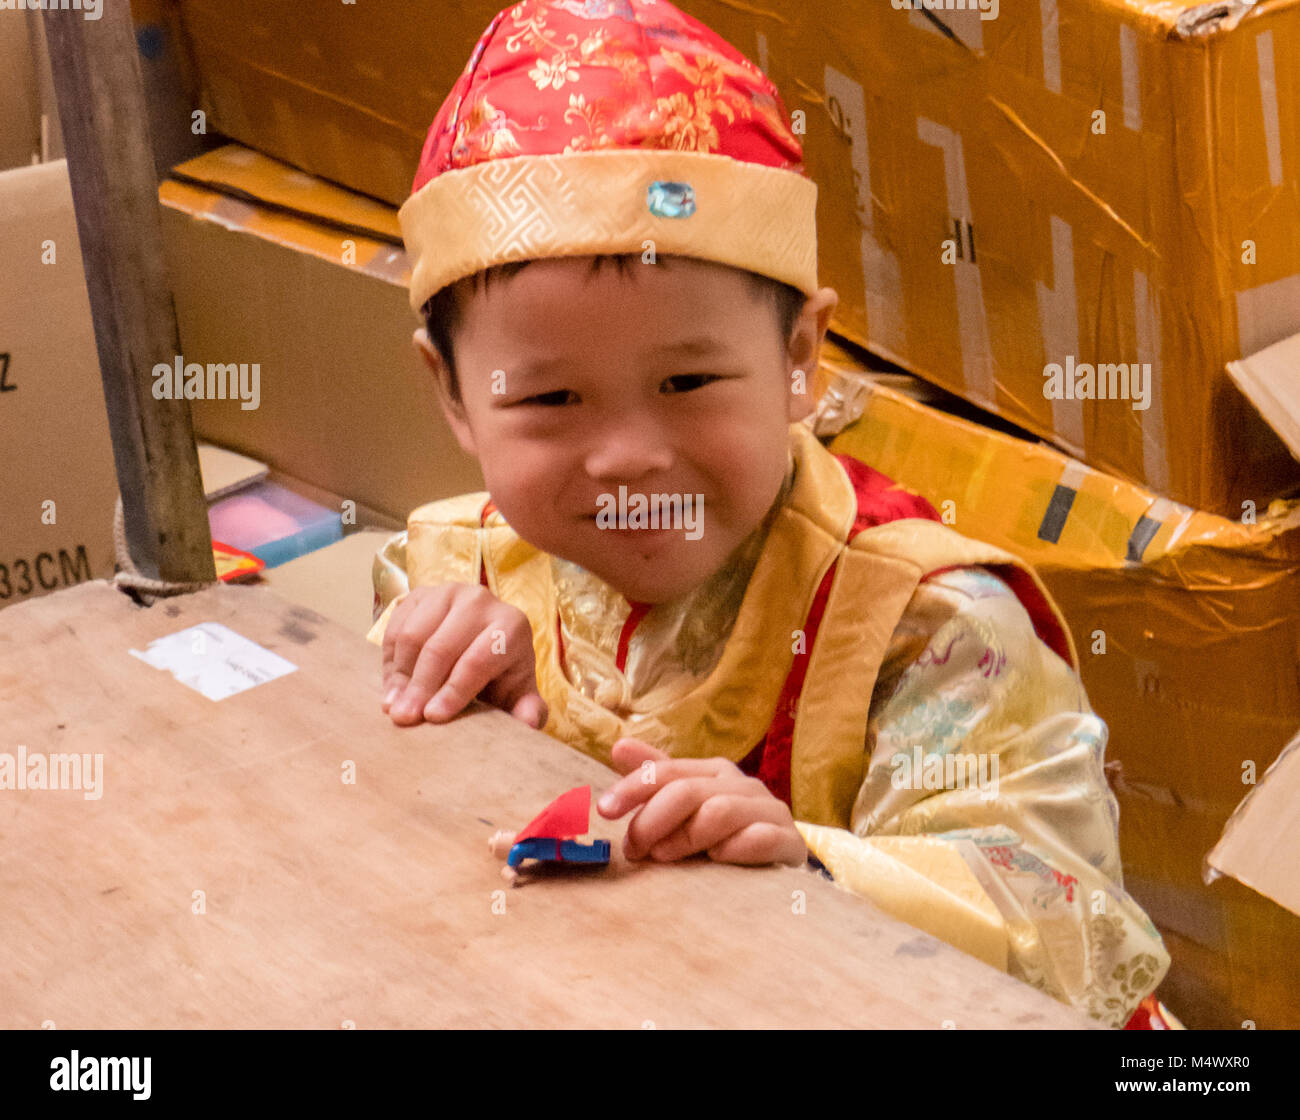 . Chinese New Year celebration in Chinatown, London,  Large crowds flock to Chinatown for the celebration, said to be the largest outside China,A little boy in traditional outfit helps on his parents stall Credit: Ian Davidson/Alamy Live News Stock Photo